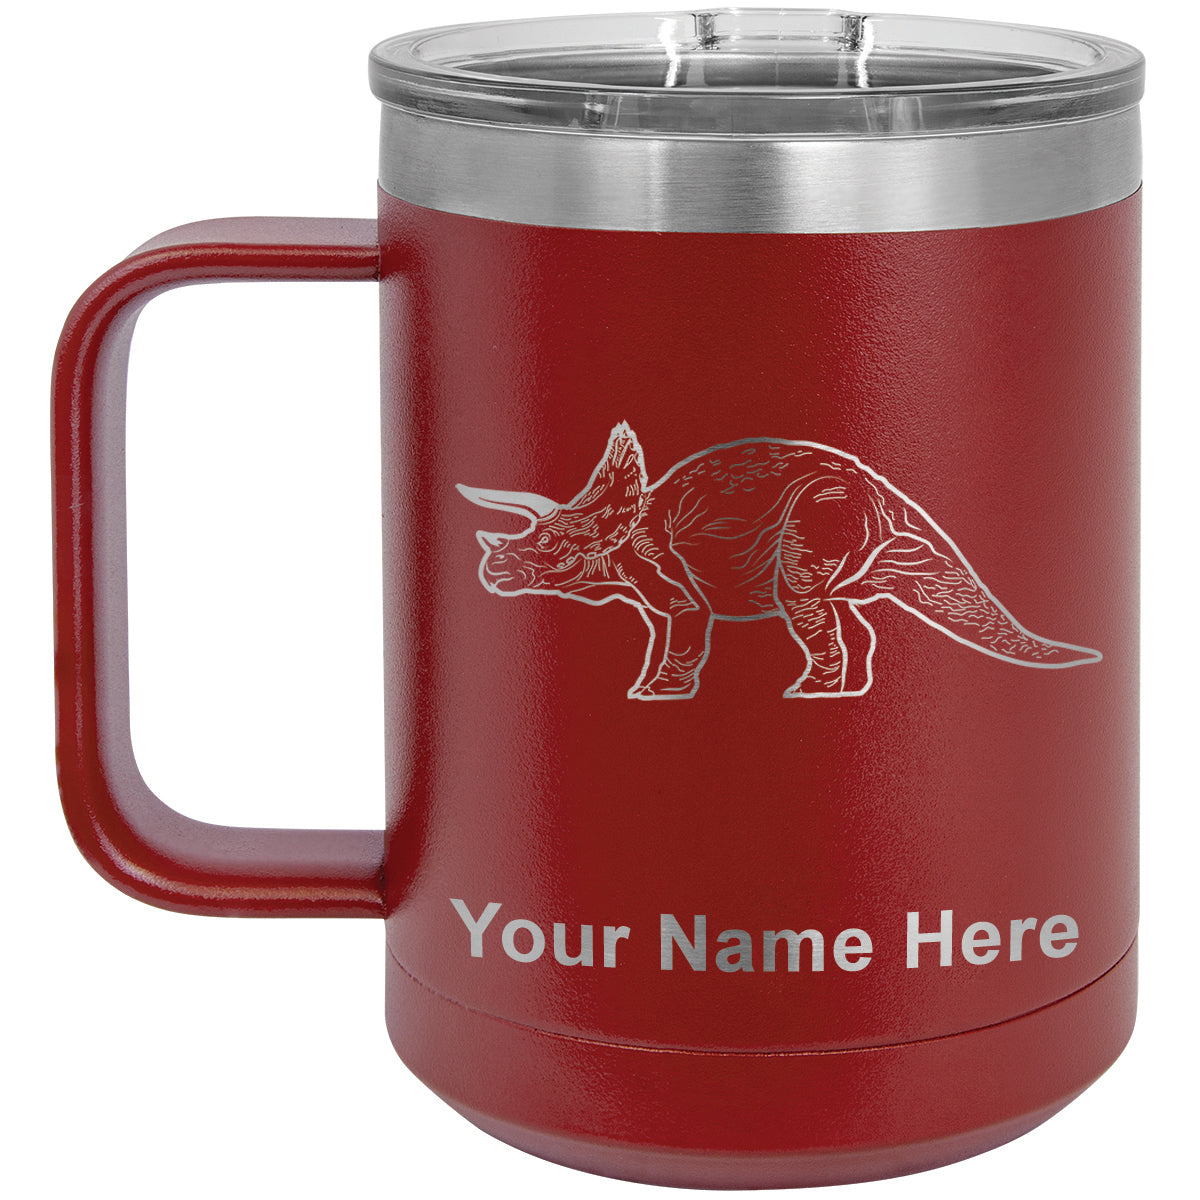 15oz Vacuum Insulated Coffee Mug, Triceratops Dinosaur, Personalized Engraving Included